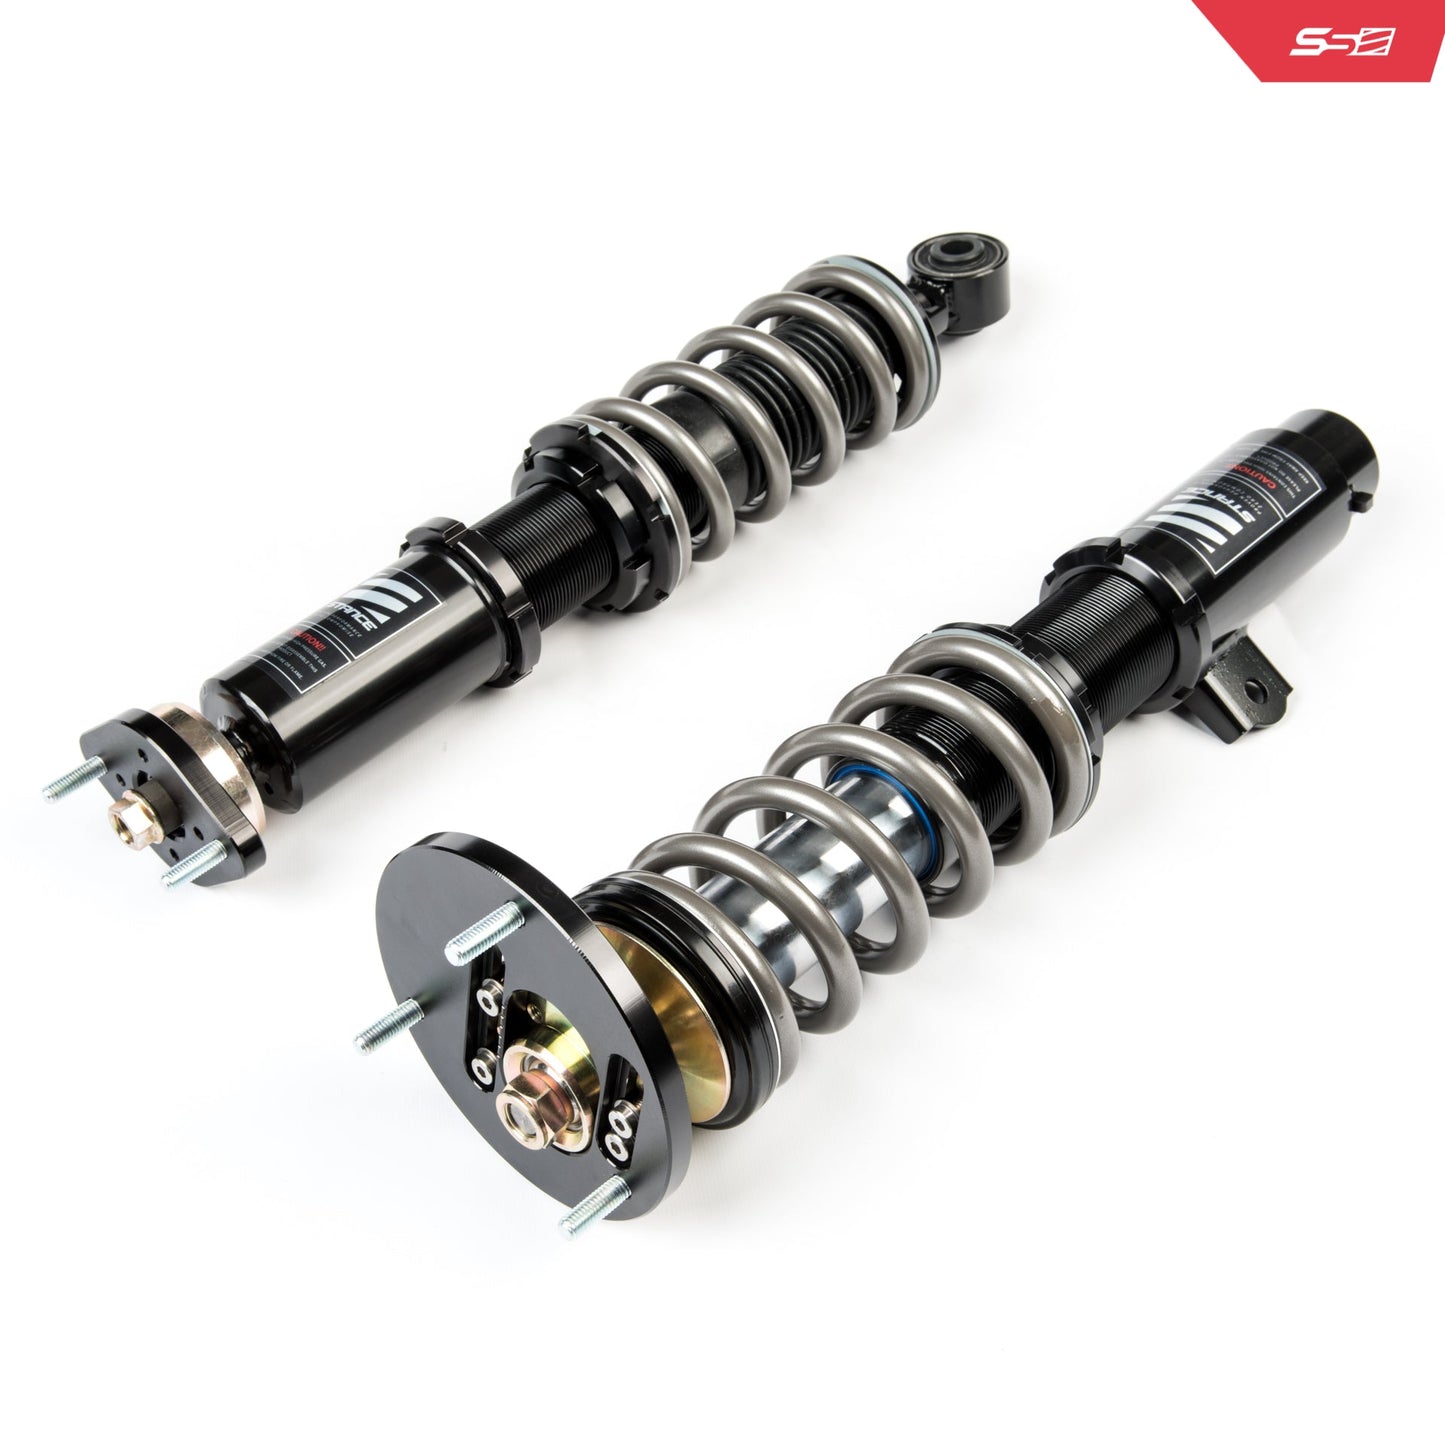 Stance Suspension - XR1 Coilovers for 00-05 BMW M3 E46 (ST-E46-XR1)